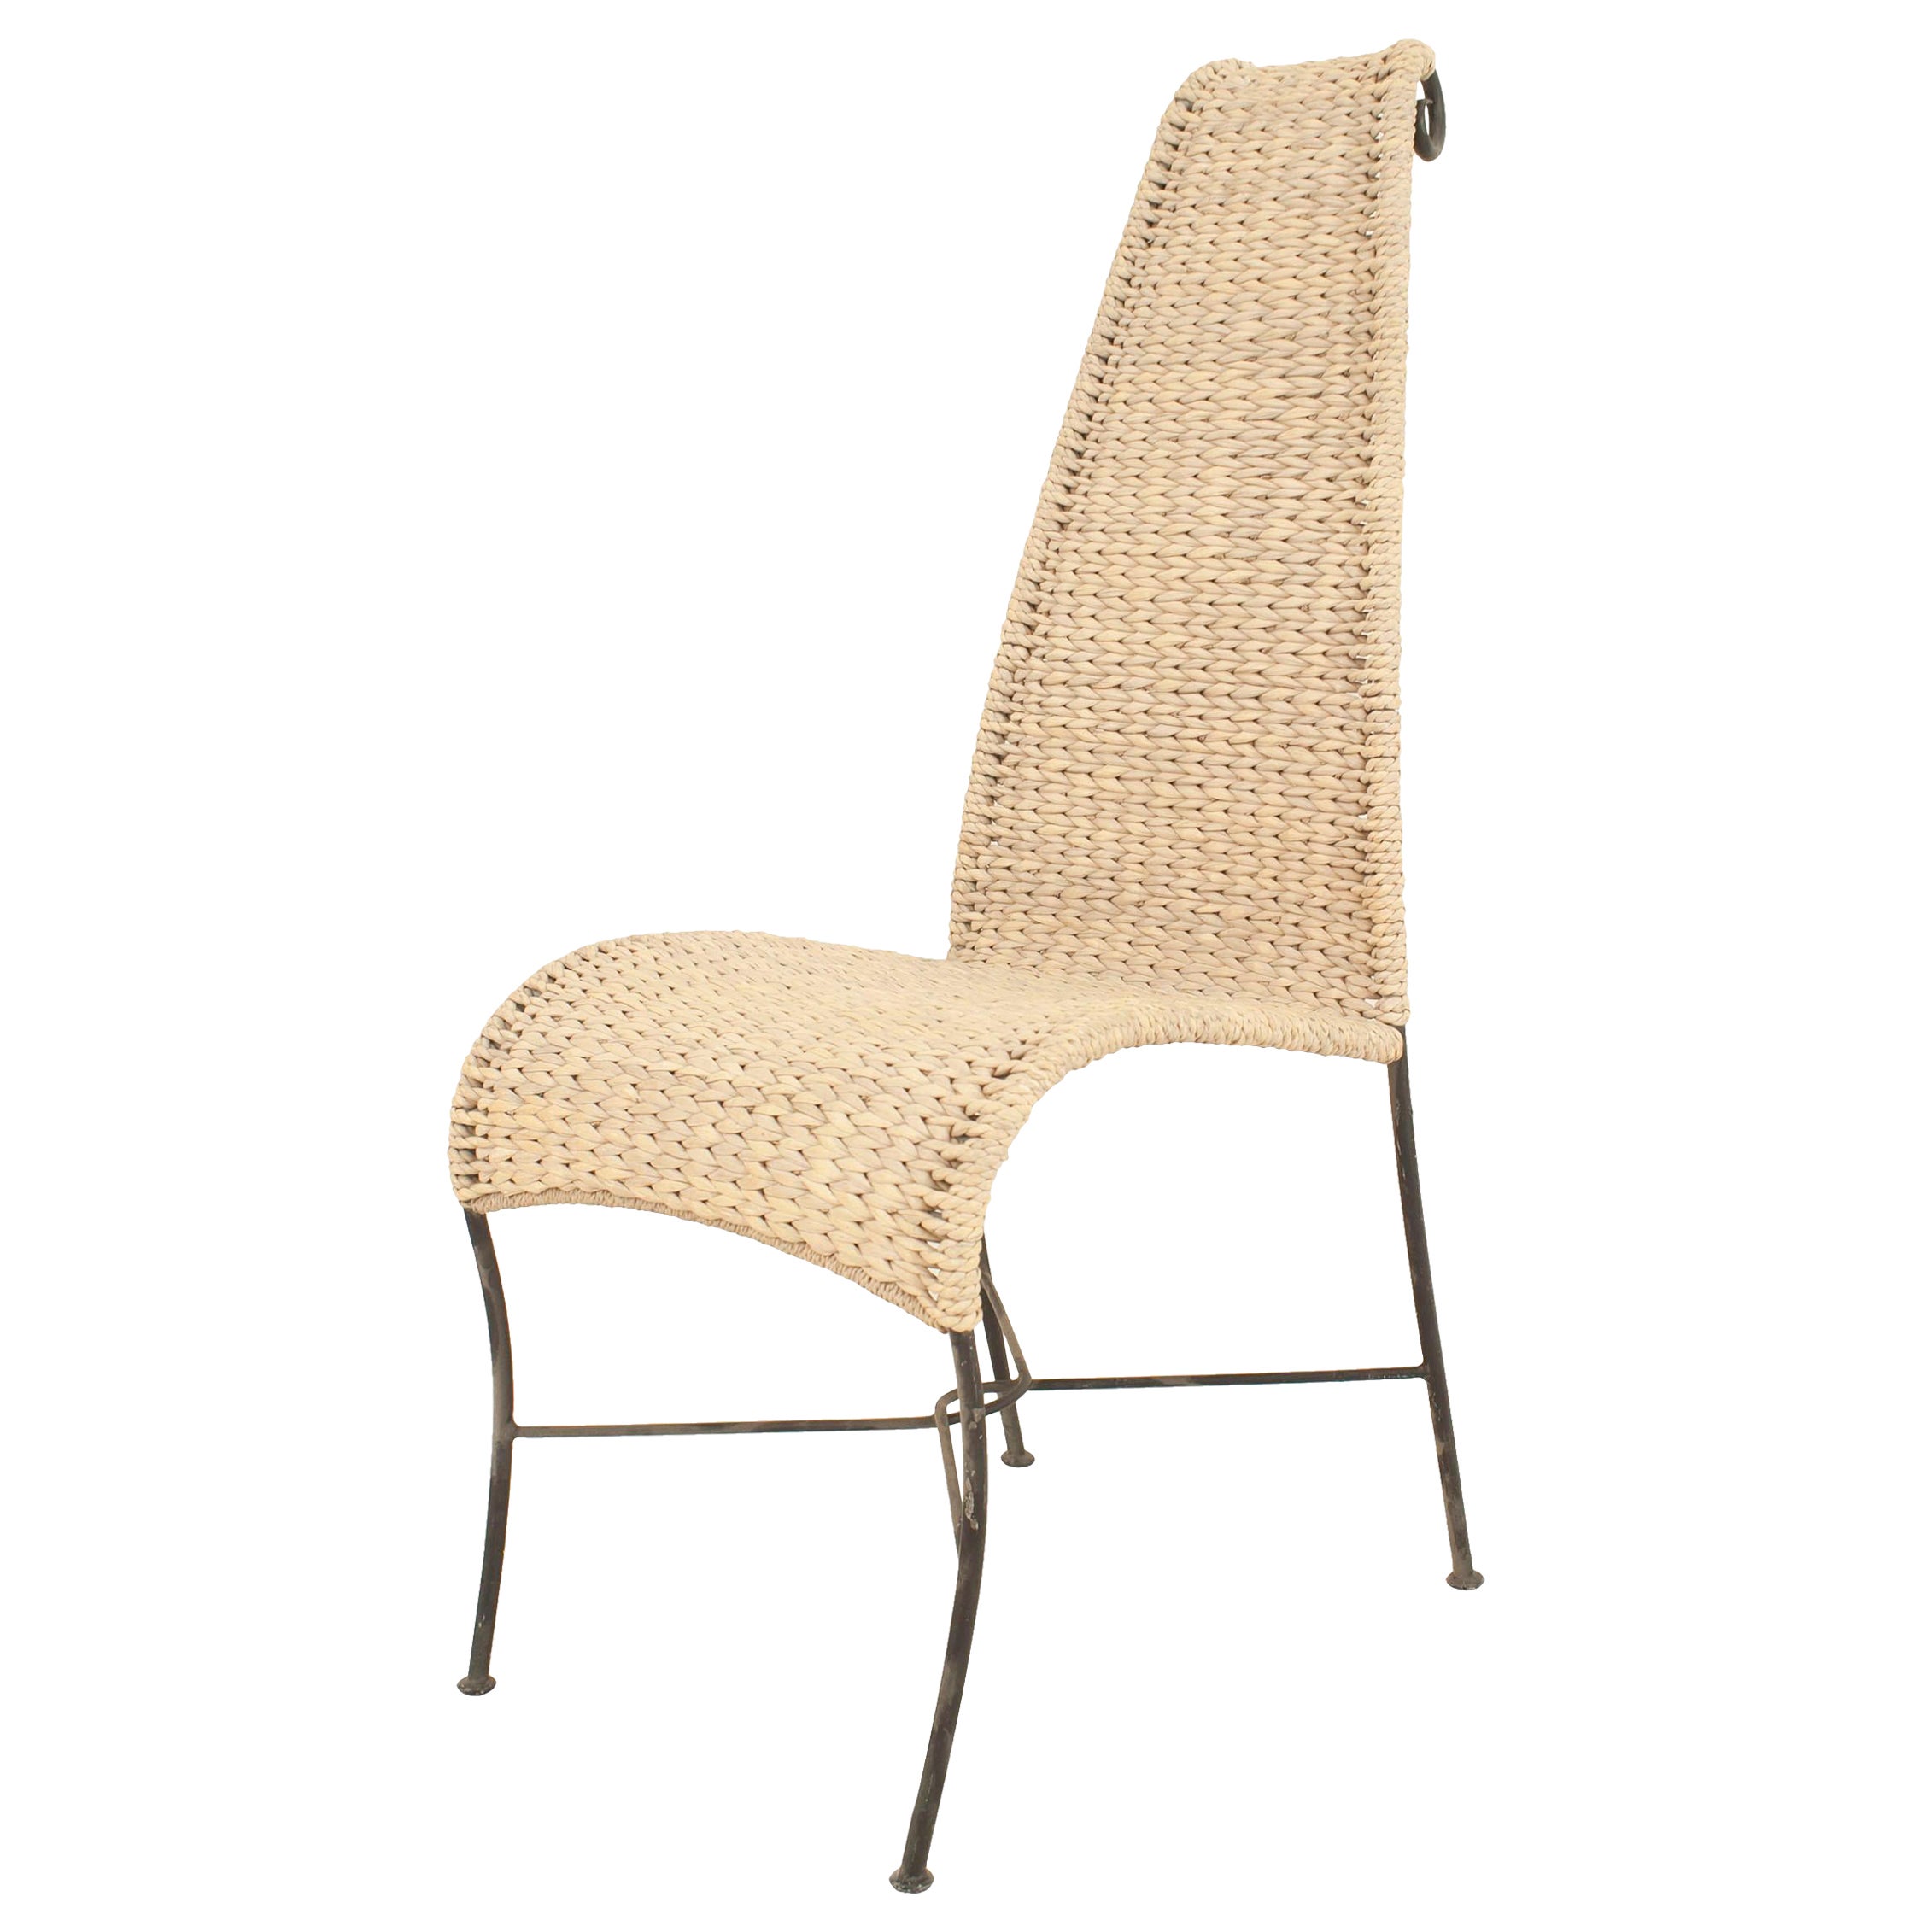 American Post-War Rattan Side Chair For Sale